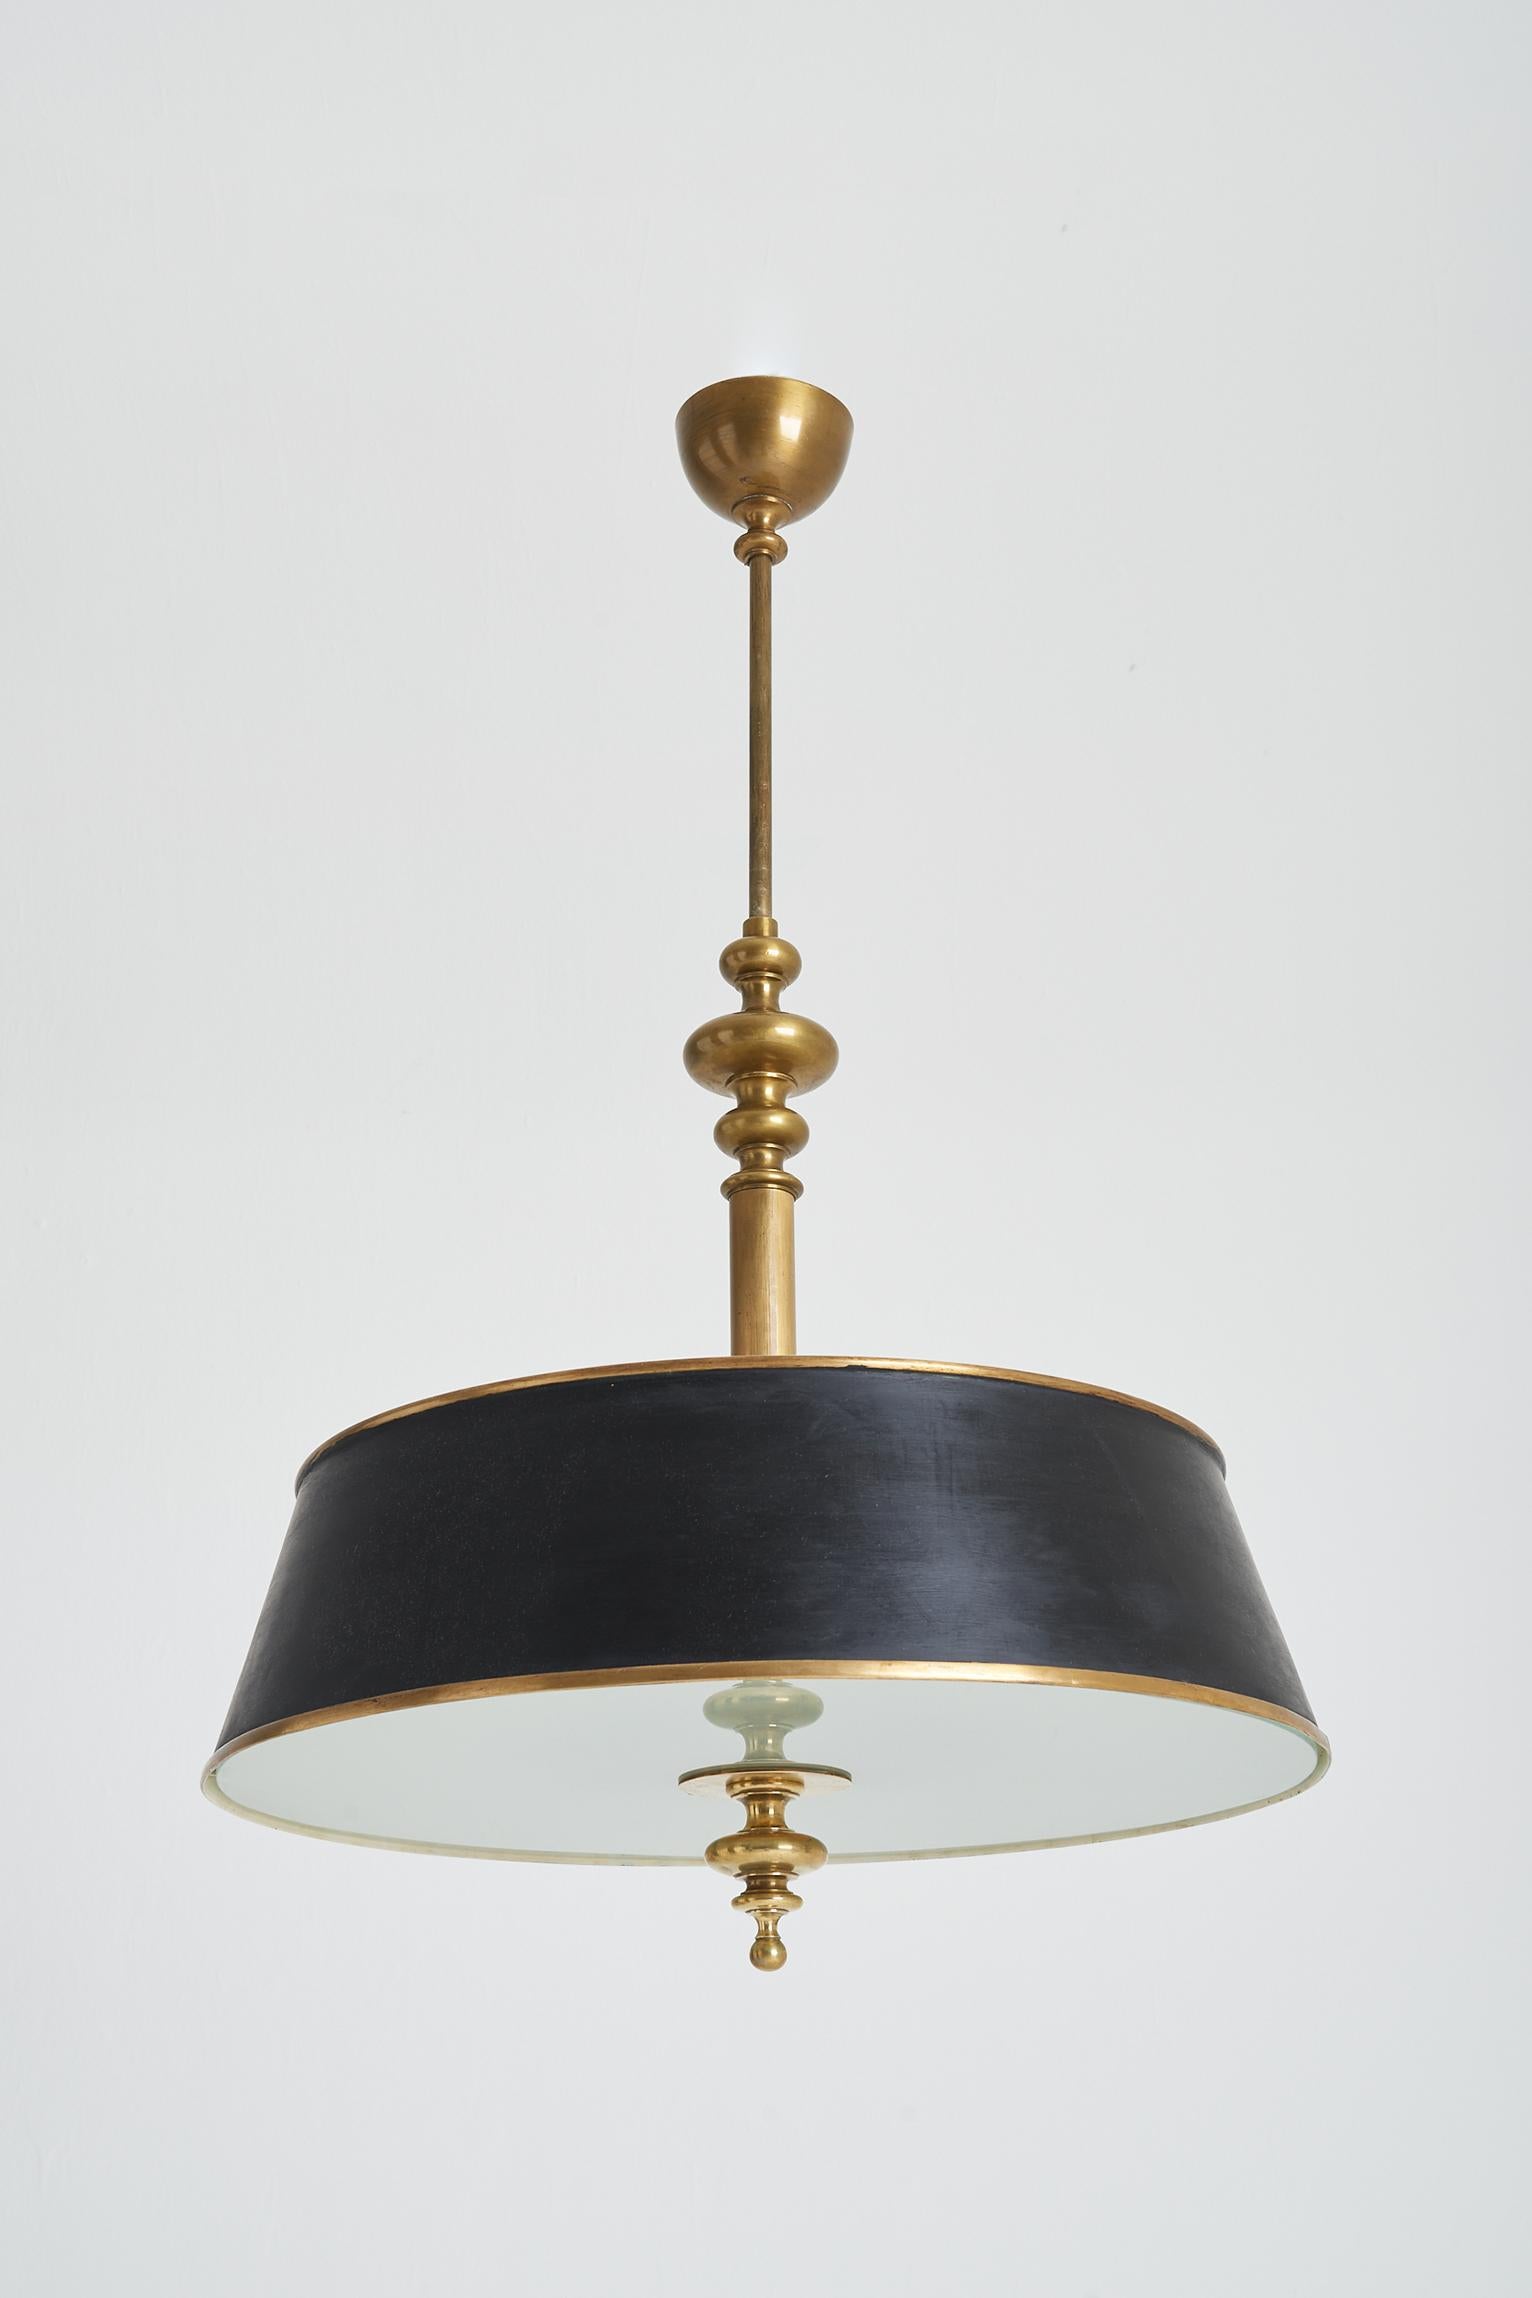 A large brass, sanded glass and black tole ceiling light.
Internally lit with 8 lights, and the recessed top enclosing 4 more.
Sweden, Circa 1940.